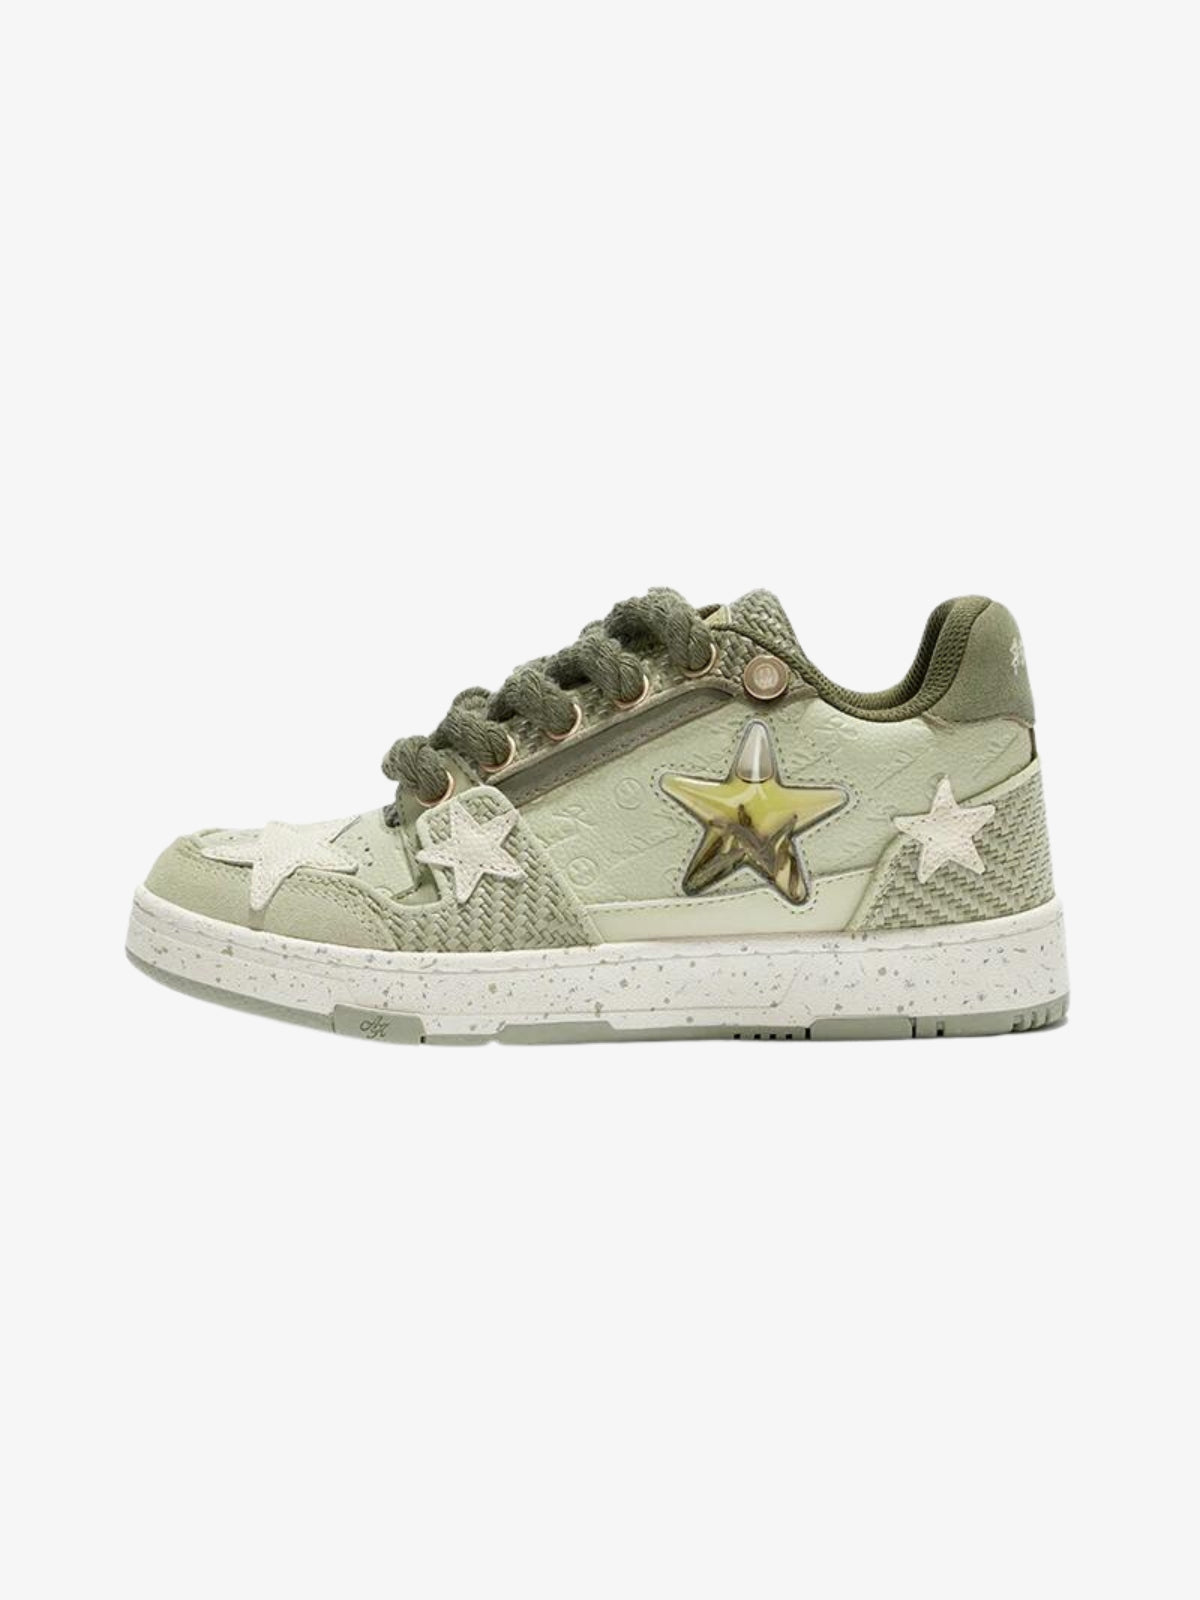 WLS Starry Glide Breathable Green Tea Retro Star Sneakers